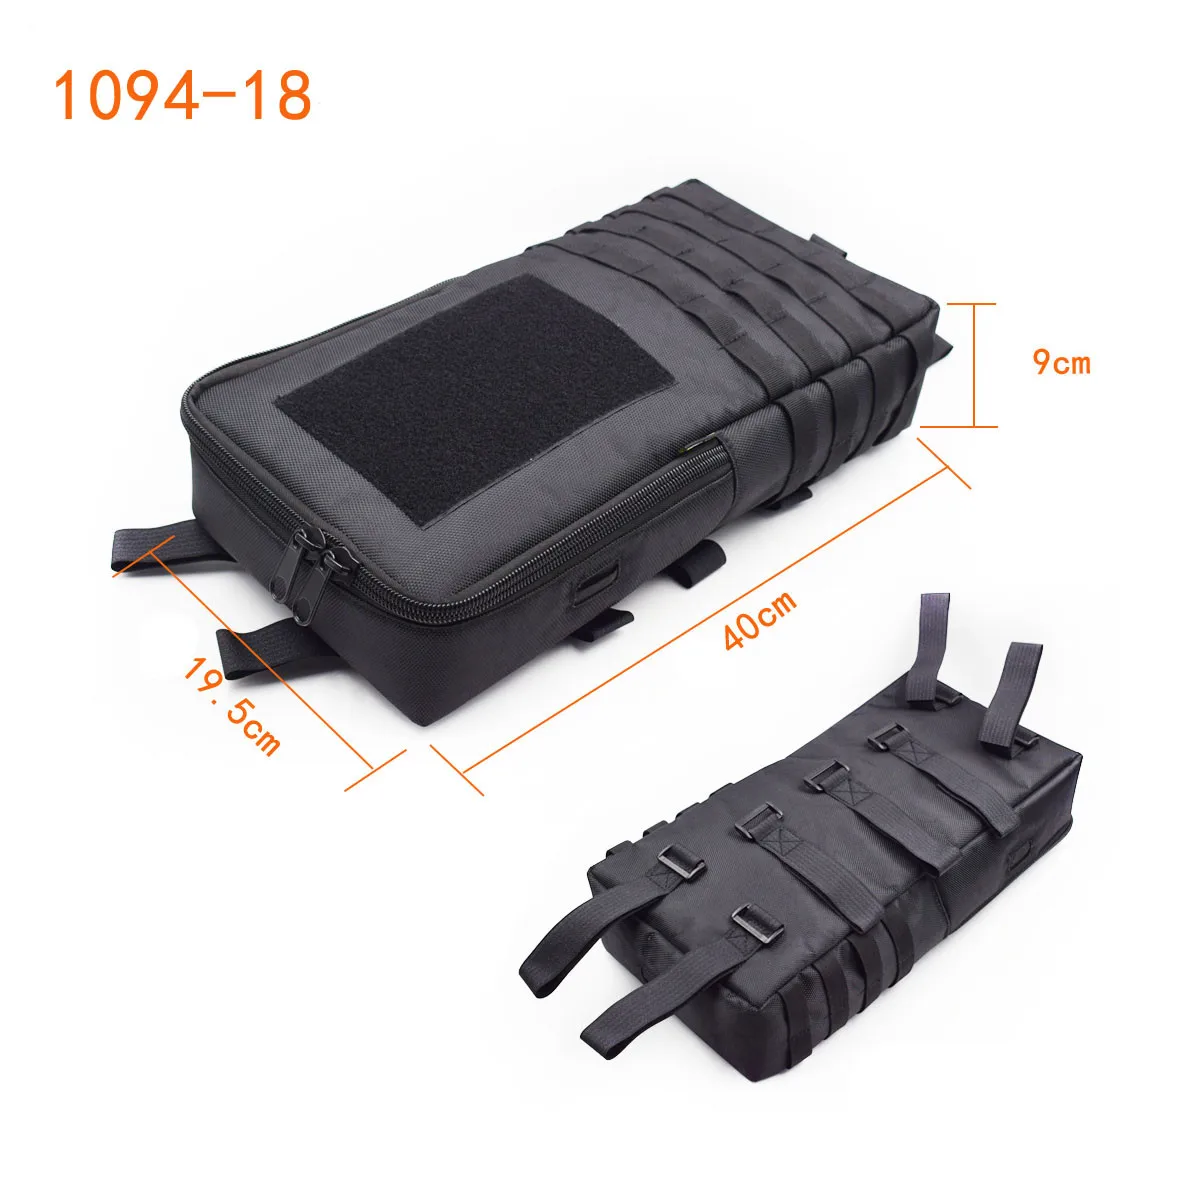 40X19.5X9CM Bicycle Lithium Battery Oxford Cloth Storage Bag Wear-resistant Shockproo Bike Bag for Scooter E-bike Bag New Produc